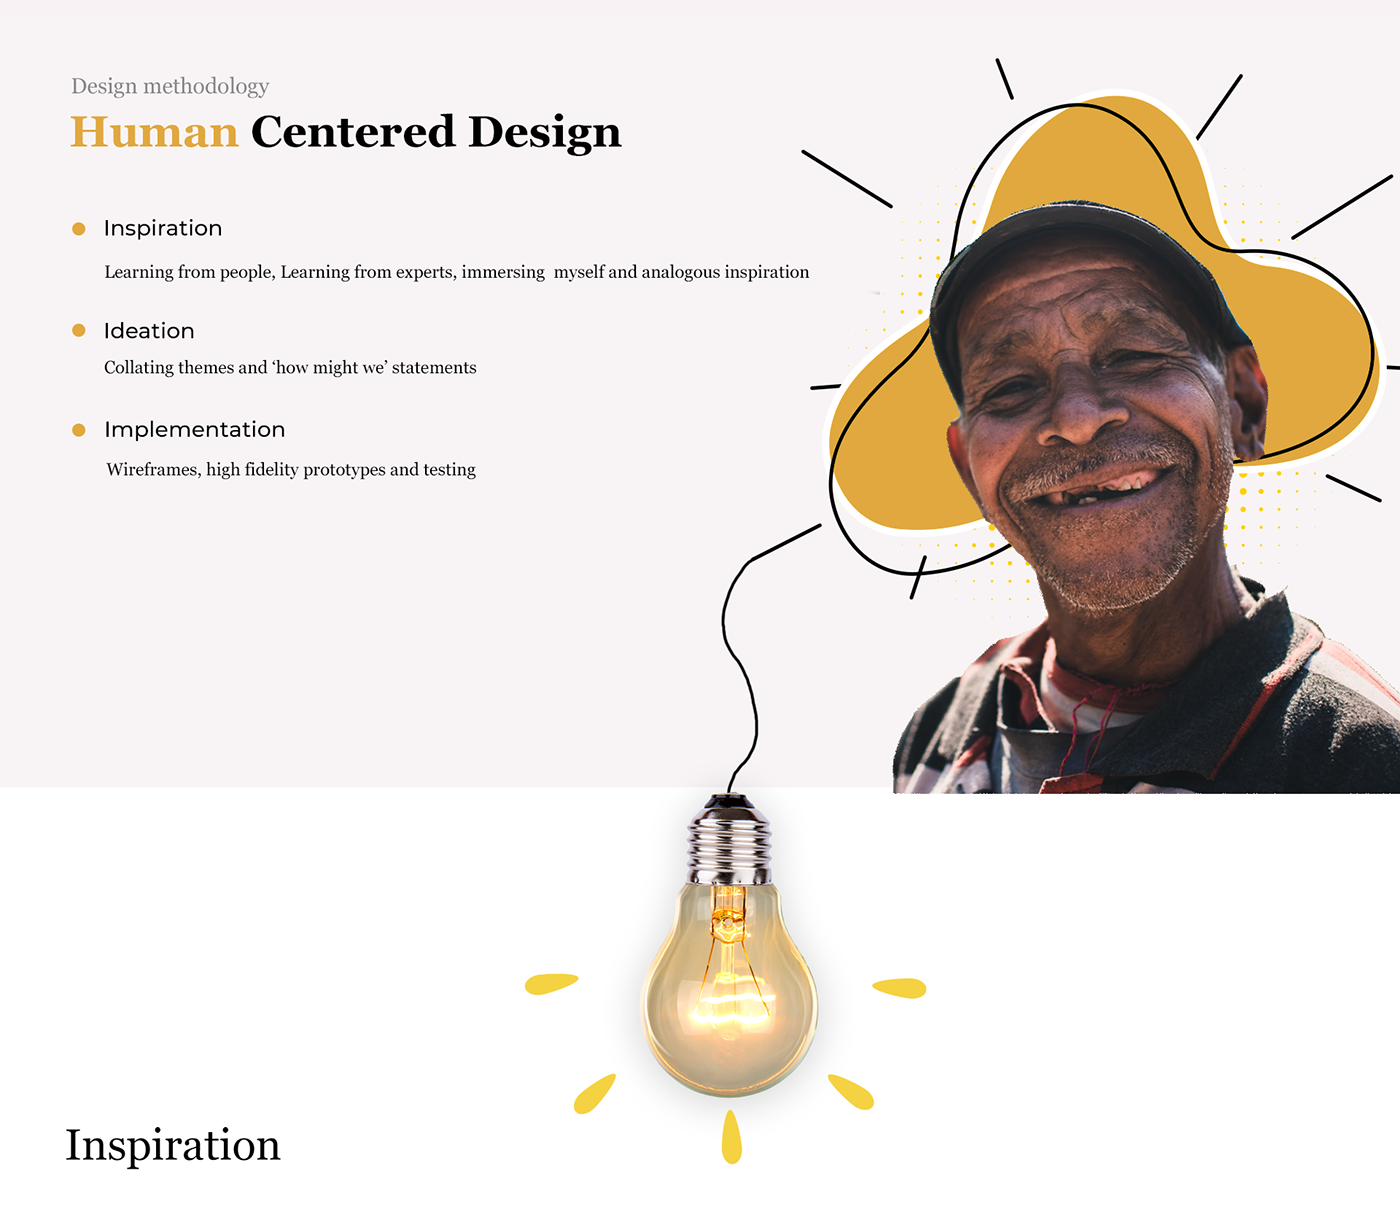 designer human centred design prototype social change UI/UX user experience user interface UX Research